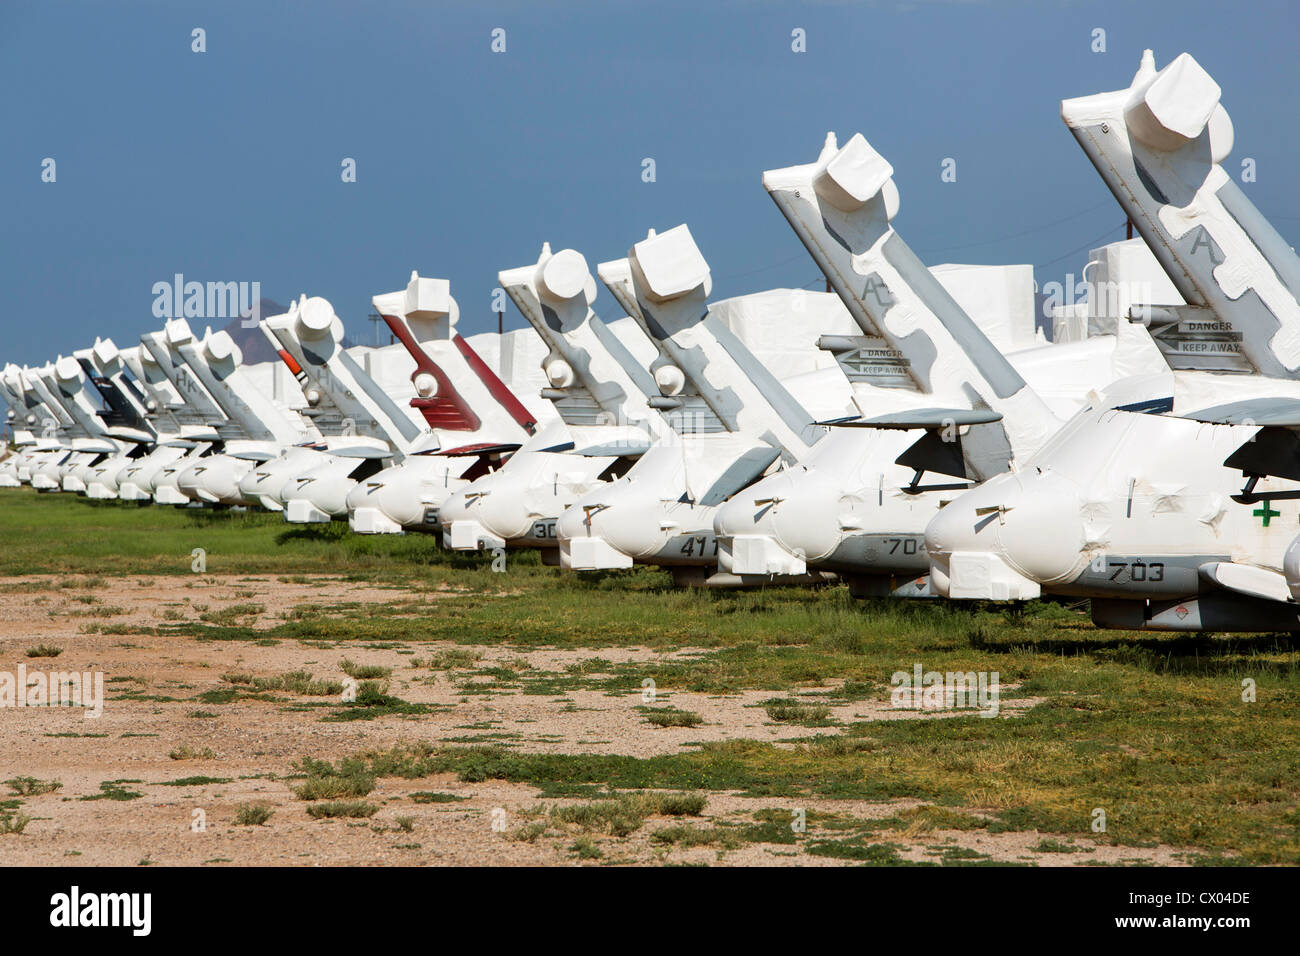 SH-60 Seahawk helicopters in storage at the 309th Aerospace Maintenance and Regeneration Group at Davis-Monthan Air Force Base. Stock Photo